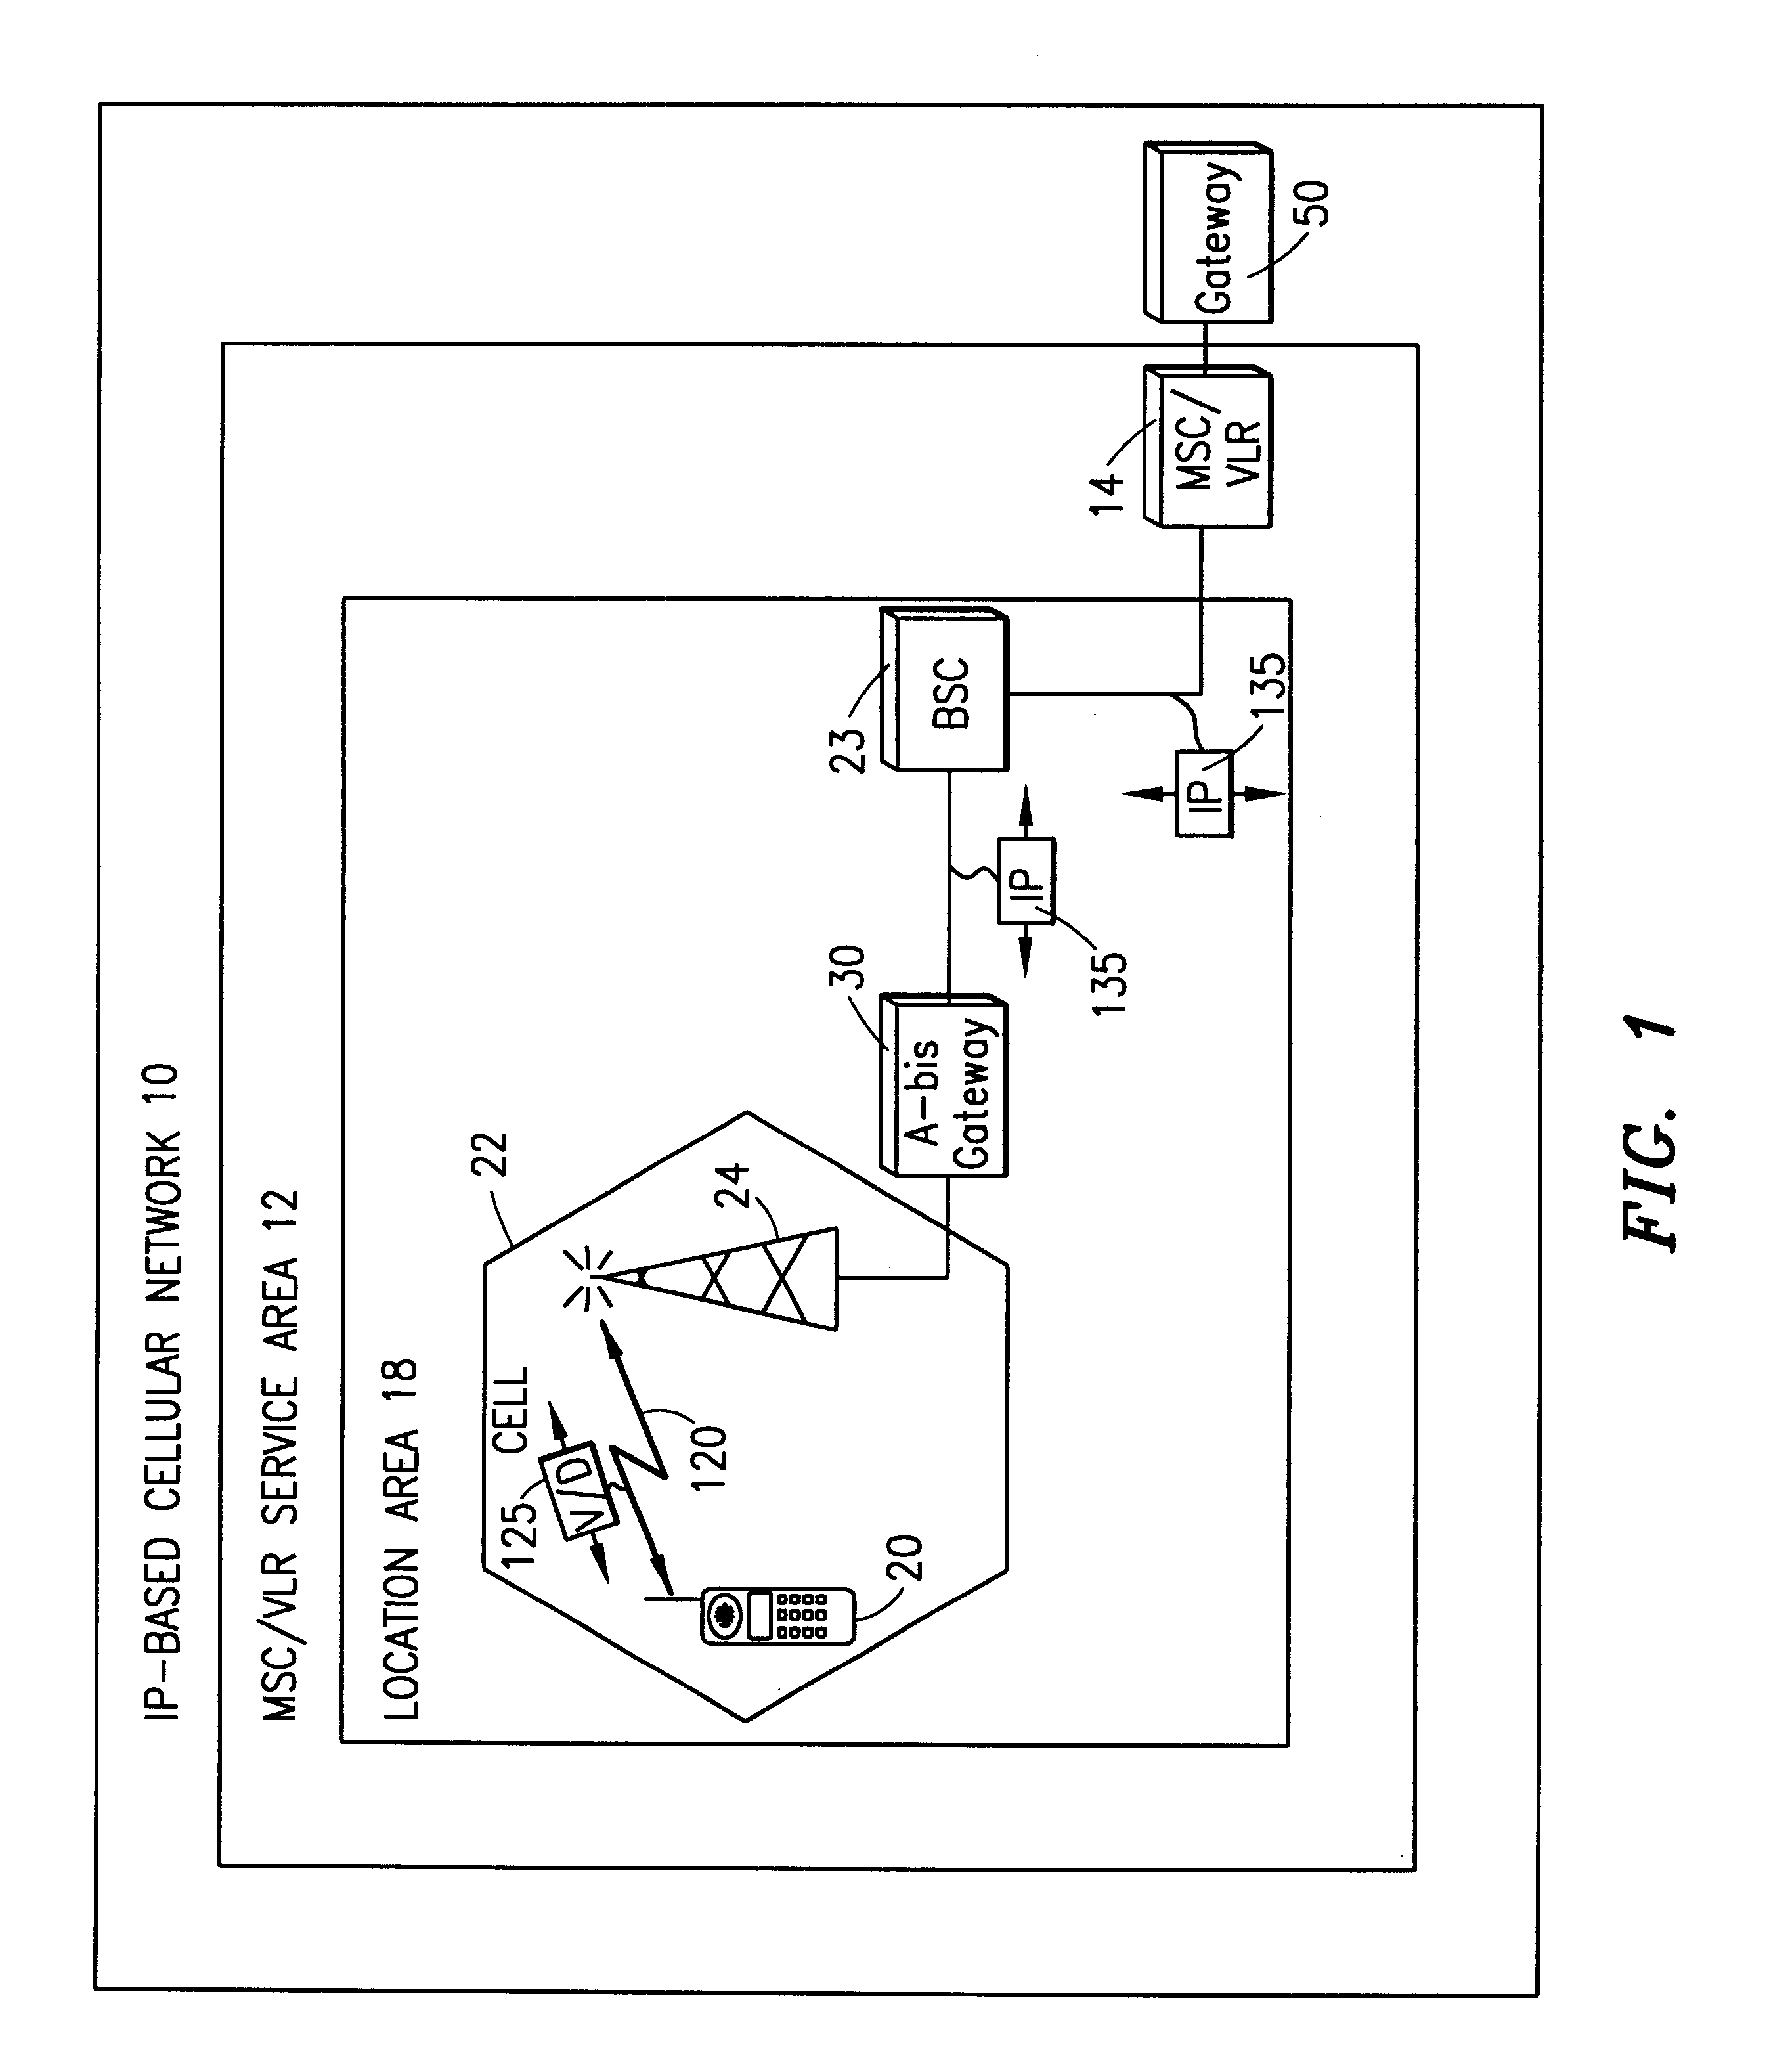 System and method for accessing the internet in an internet protocol-based cellular network